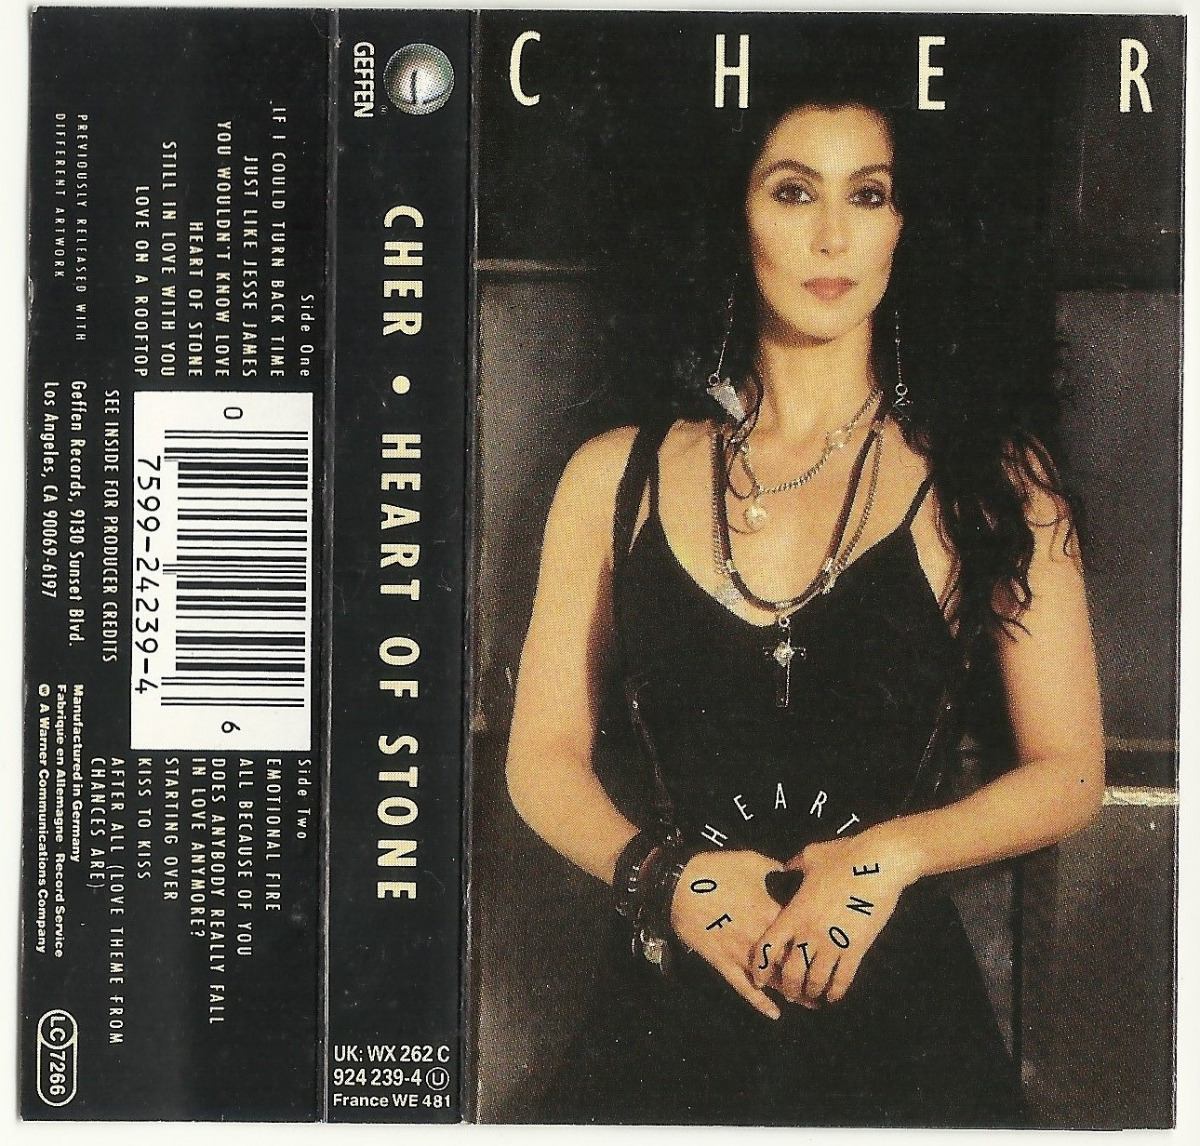 Cher - Heart of Stone. 02-fitas-k7-cher-heart-of-stone-k7-import-e-edith-piaf-D_NQ_NP_731867-MLB26570118679_122017-F